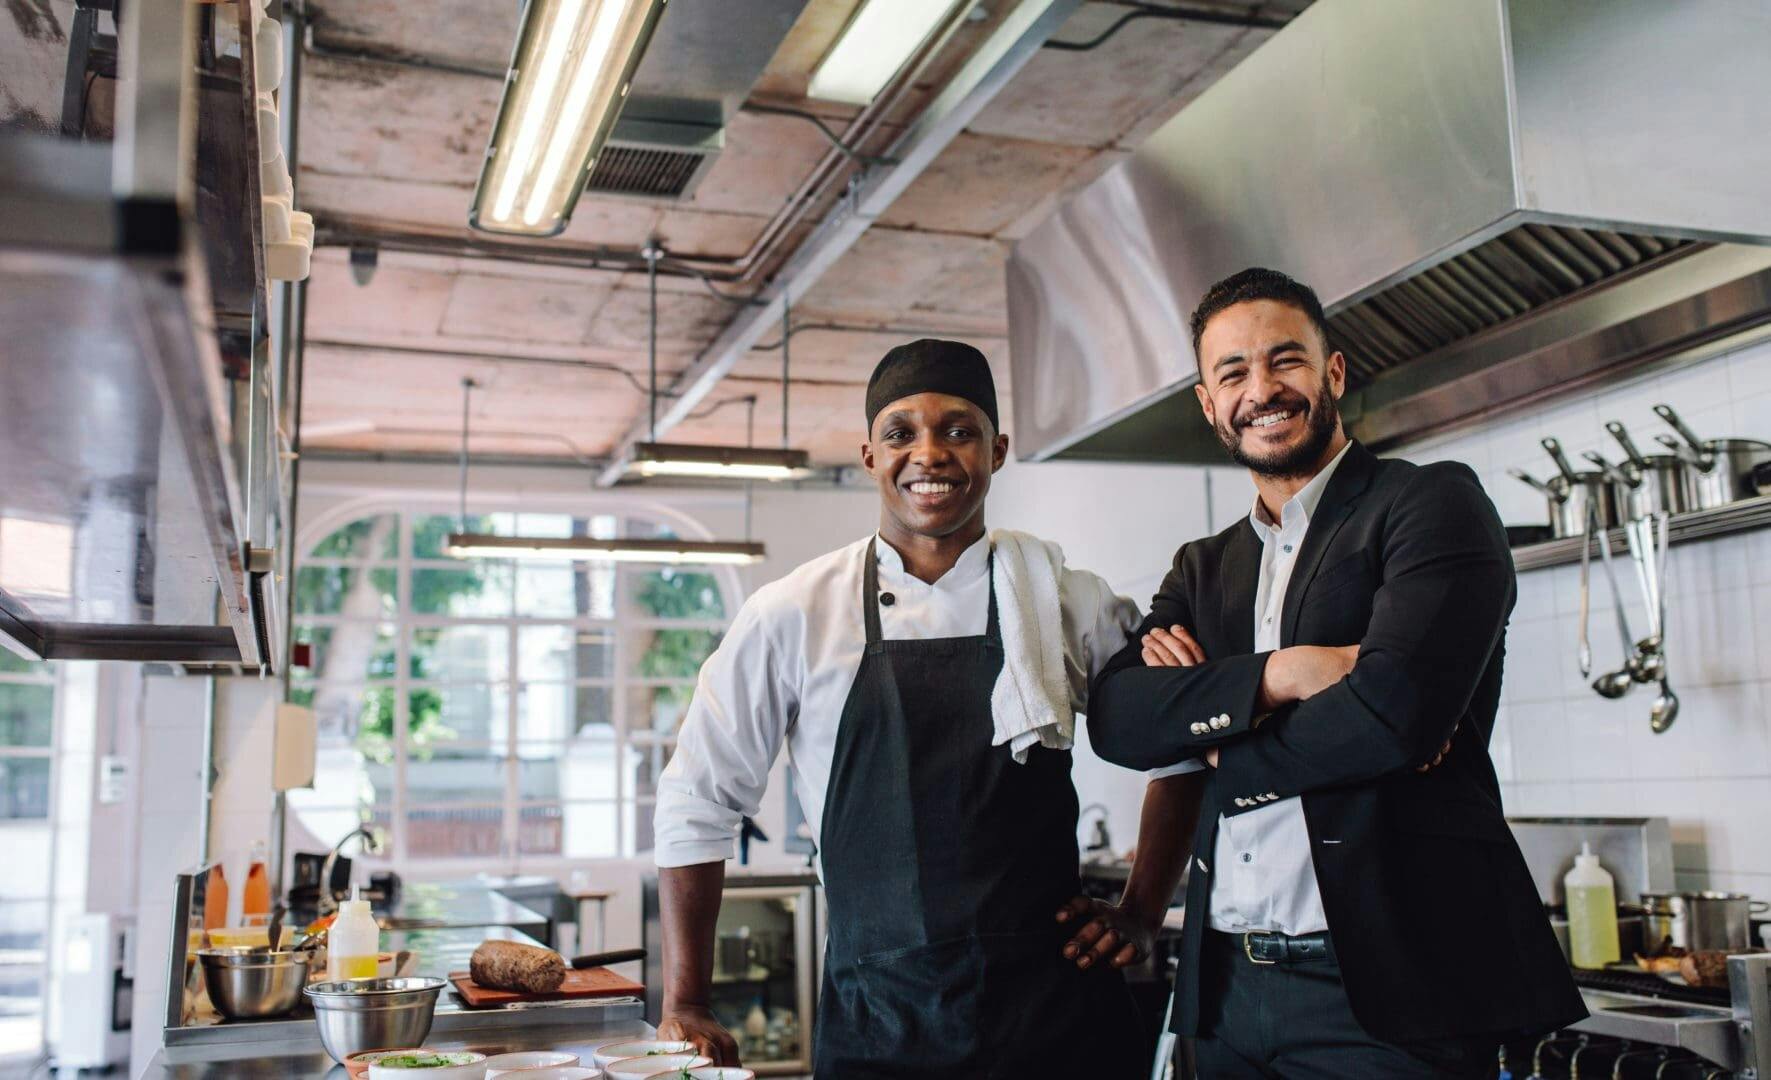 Restaurant Marketing in 2019: What You Need To Know